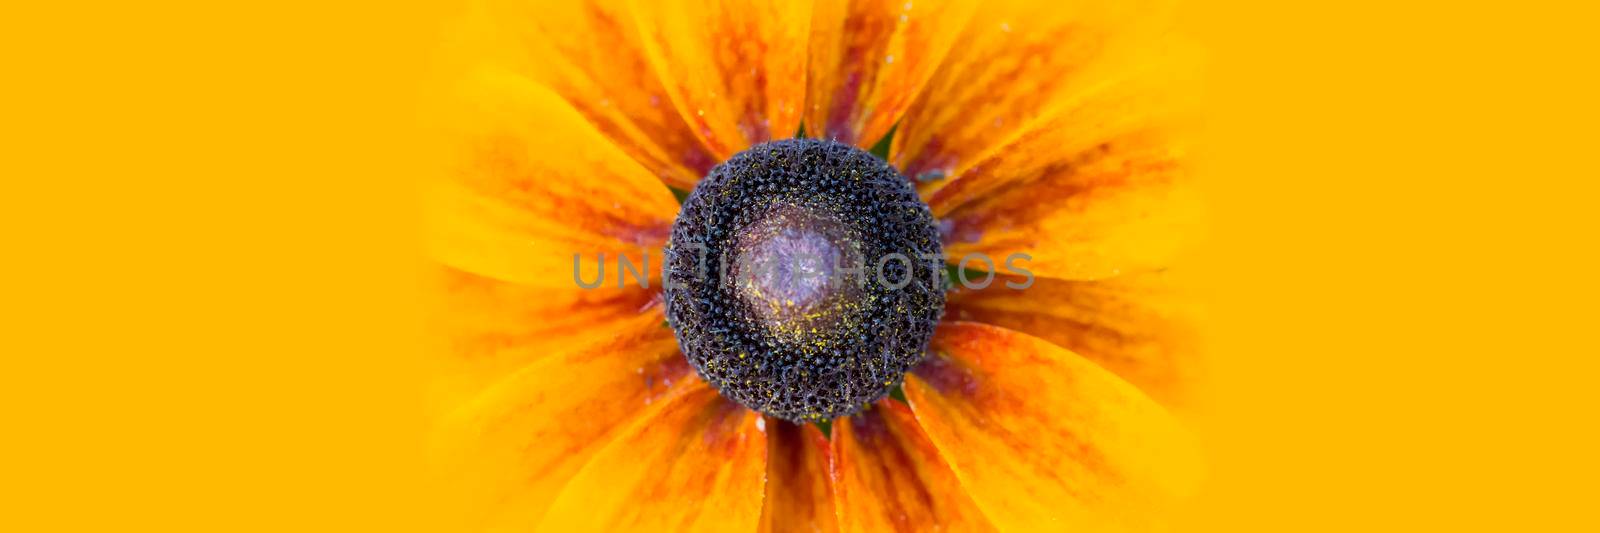 Panorama large yellow flower on a yellow background.Echinacea close up details on yellow banner wide background macro photo. Concept for summer, sun, sunshine, summer holidays travel, tropical flower and hot days. Large text negative panorama space.